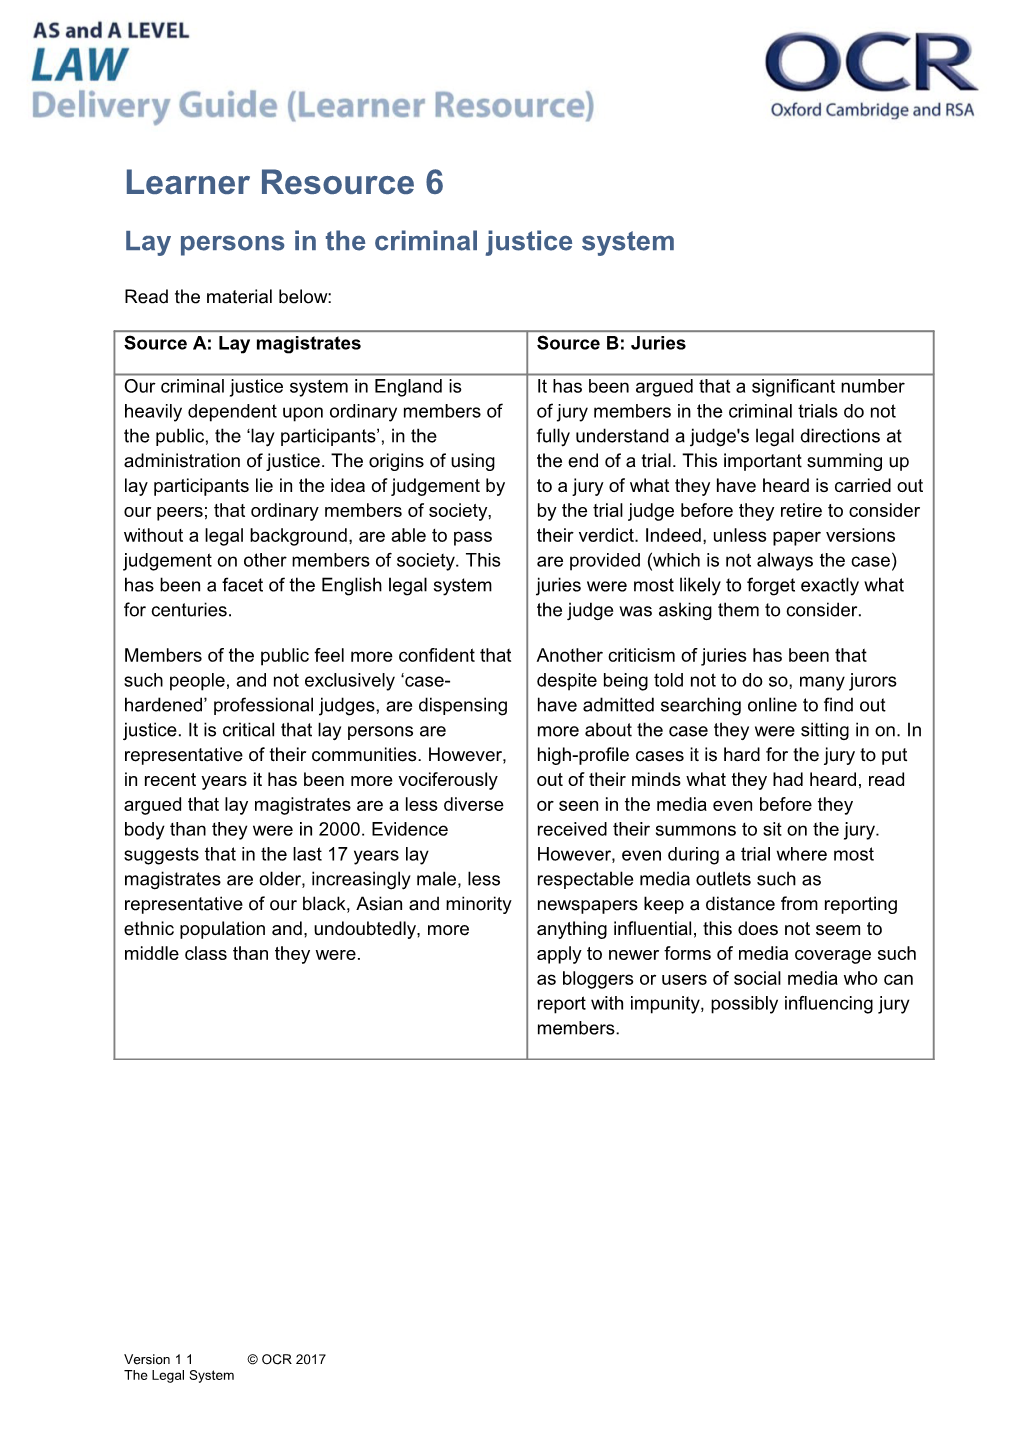 A Level Law the Legal System Learner Resource 6